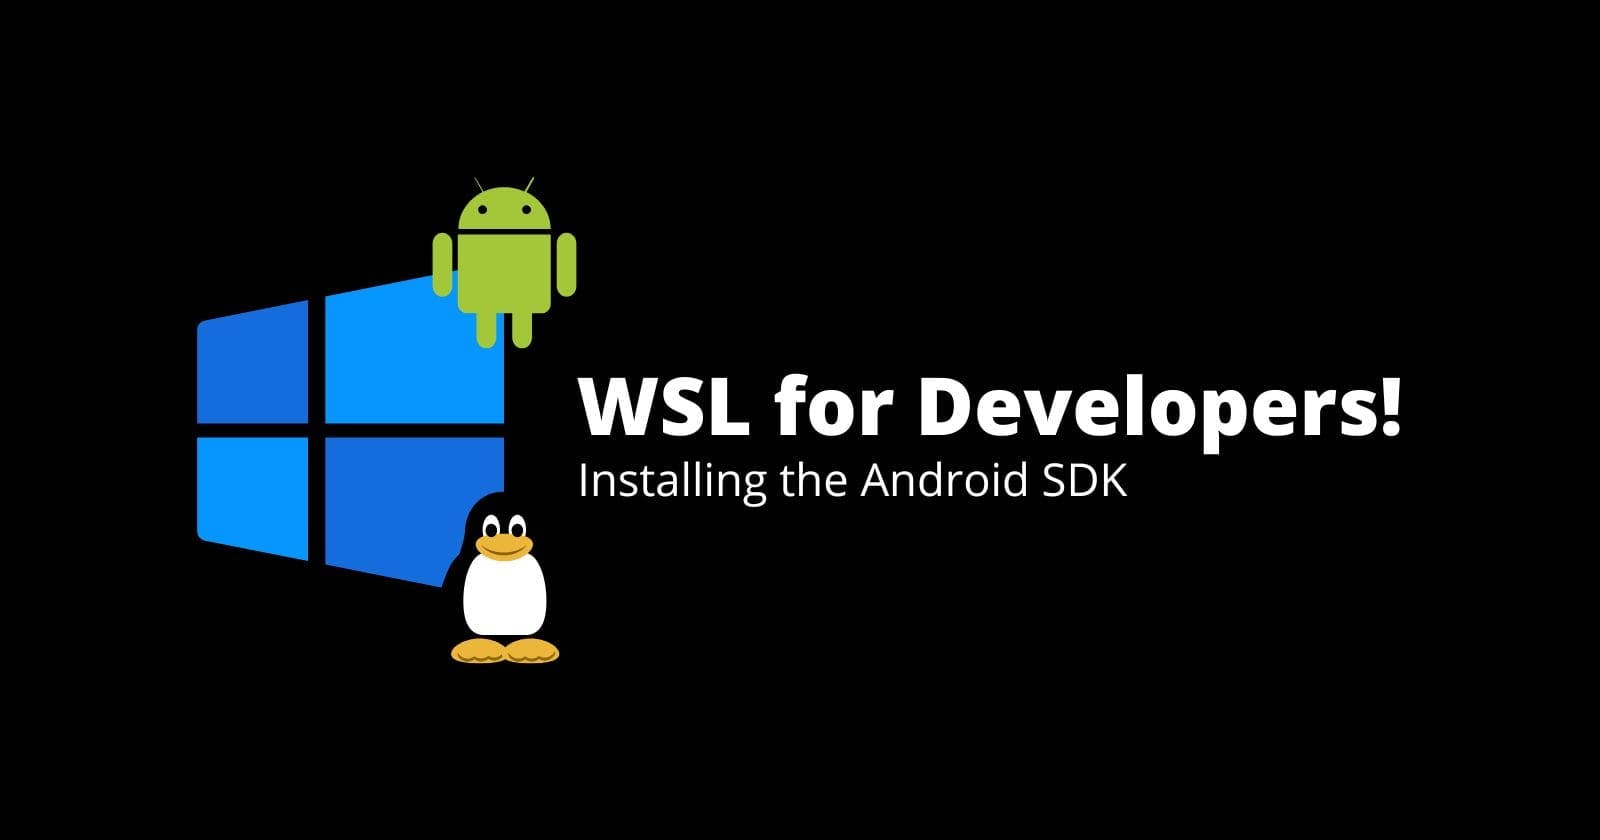 WSL for Developers!: Installing the Android SDK